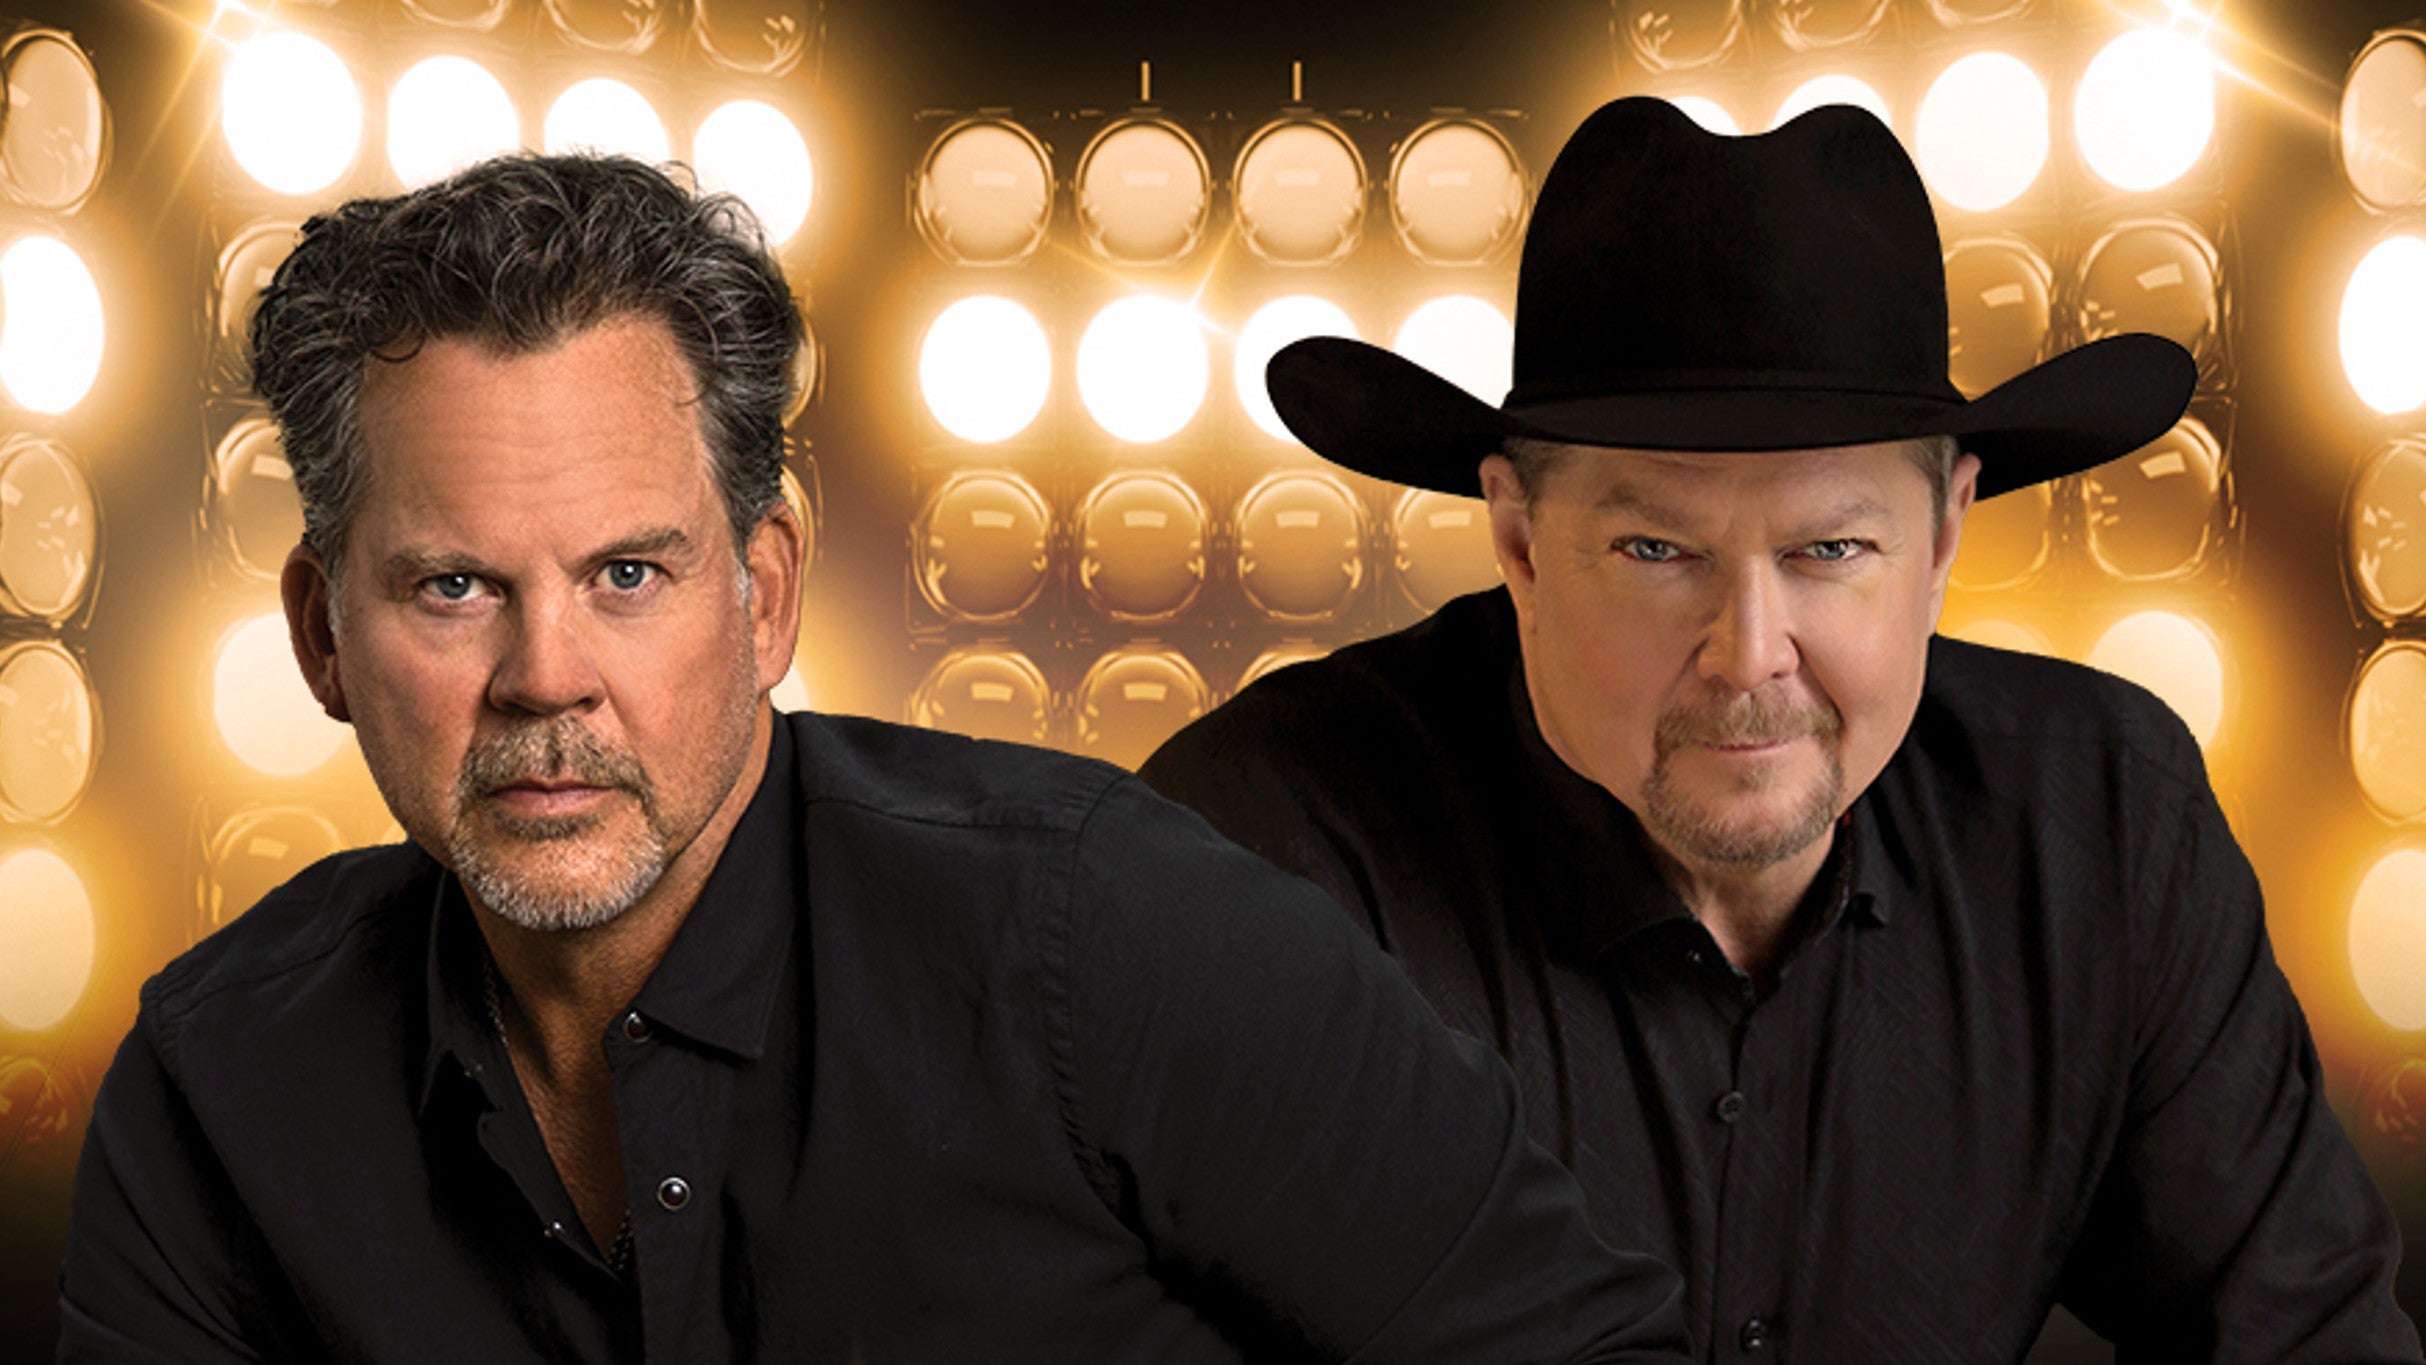 Gary Allan and Tracy Lawrence Tickets, 2023 Concert Tour Dates